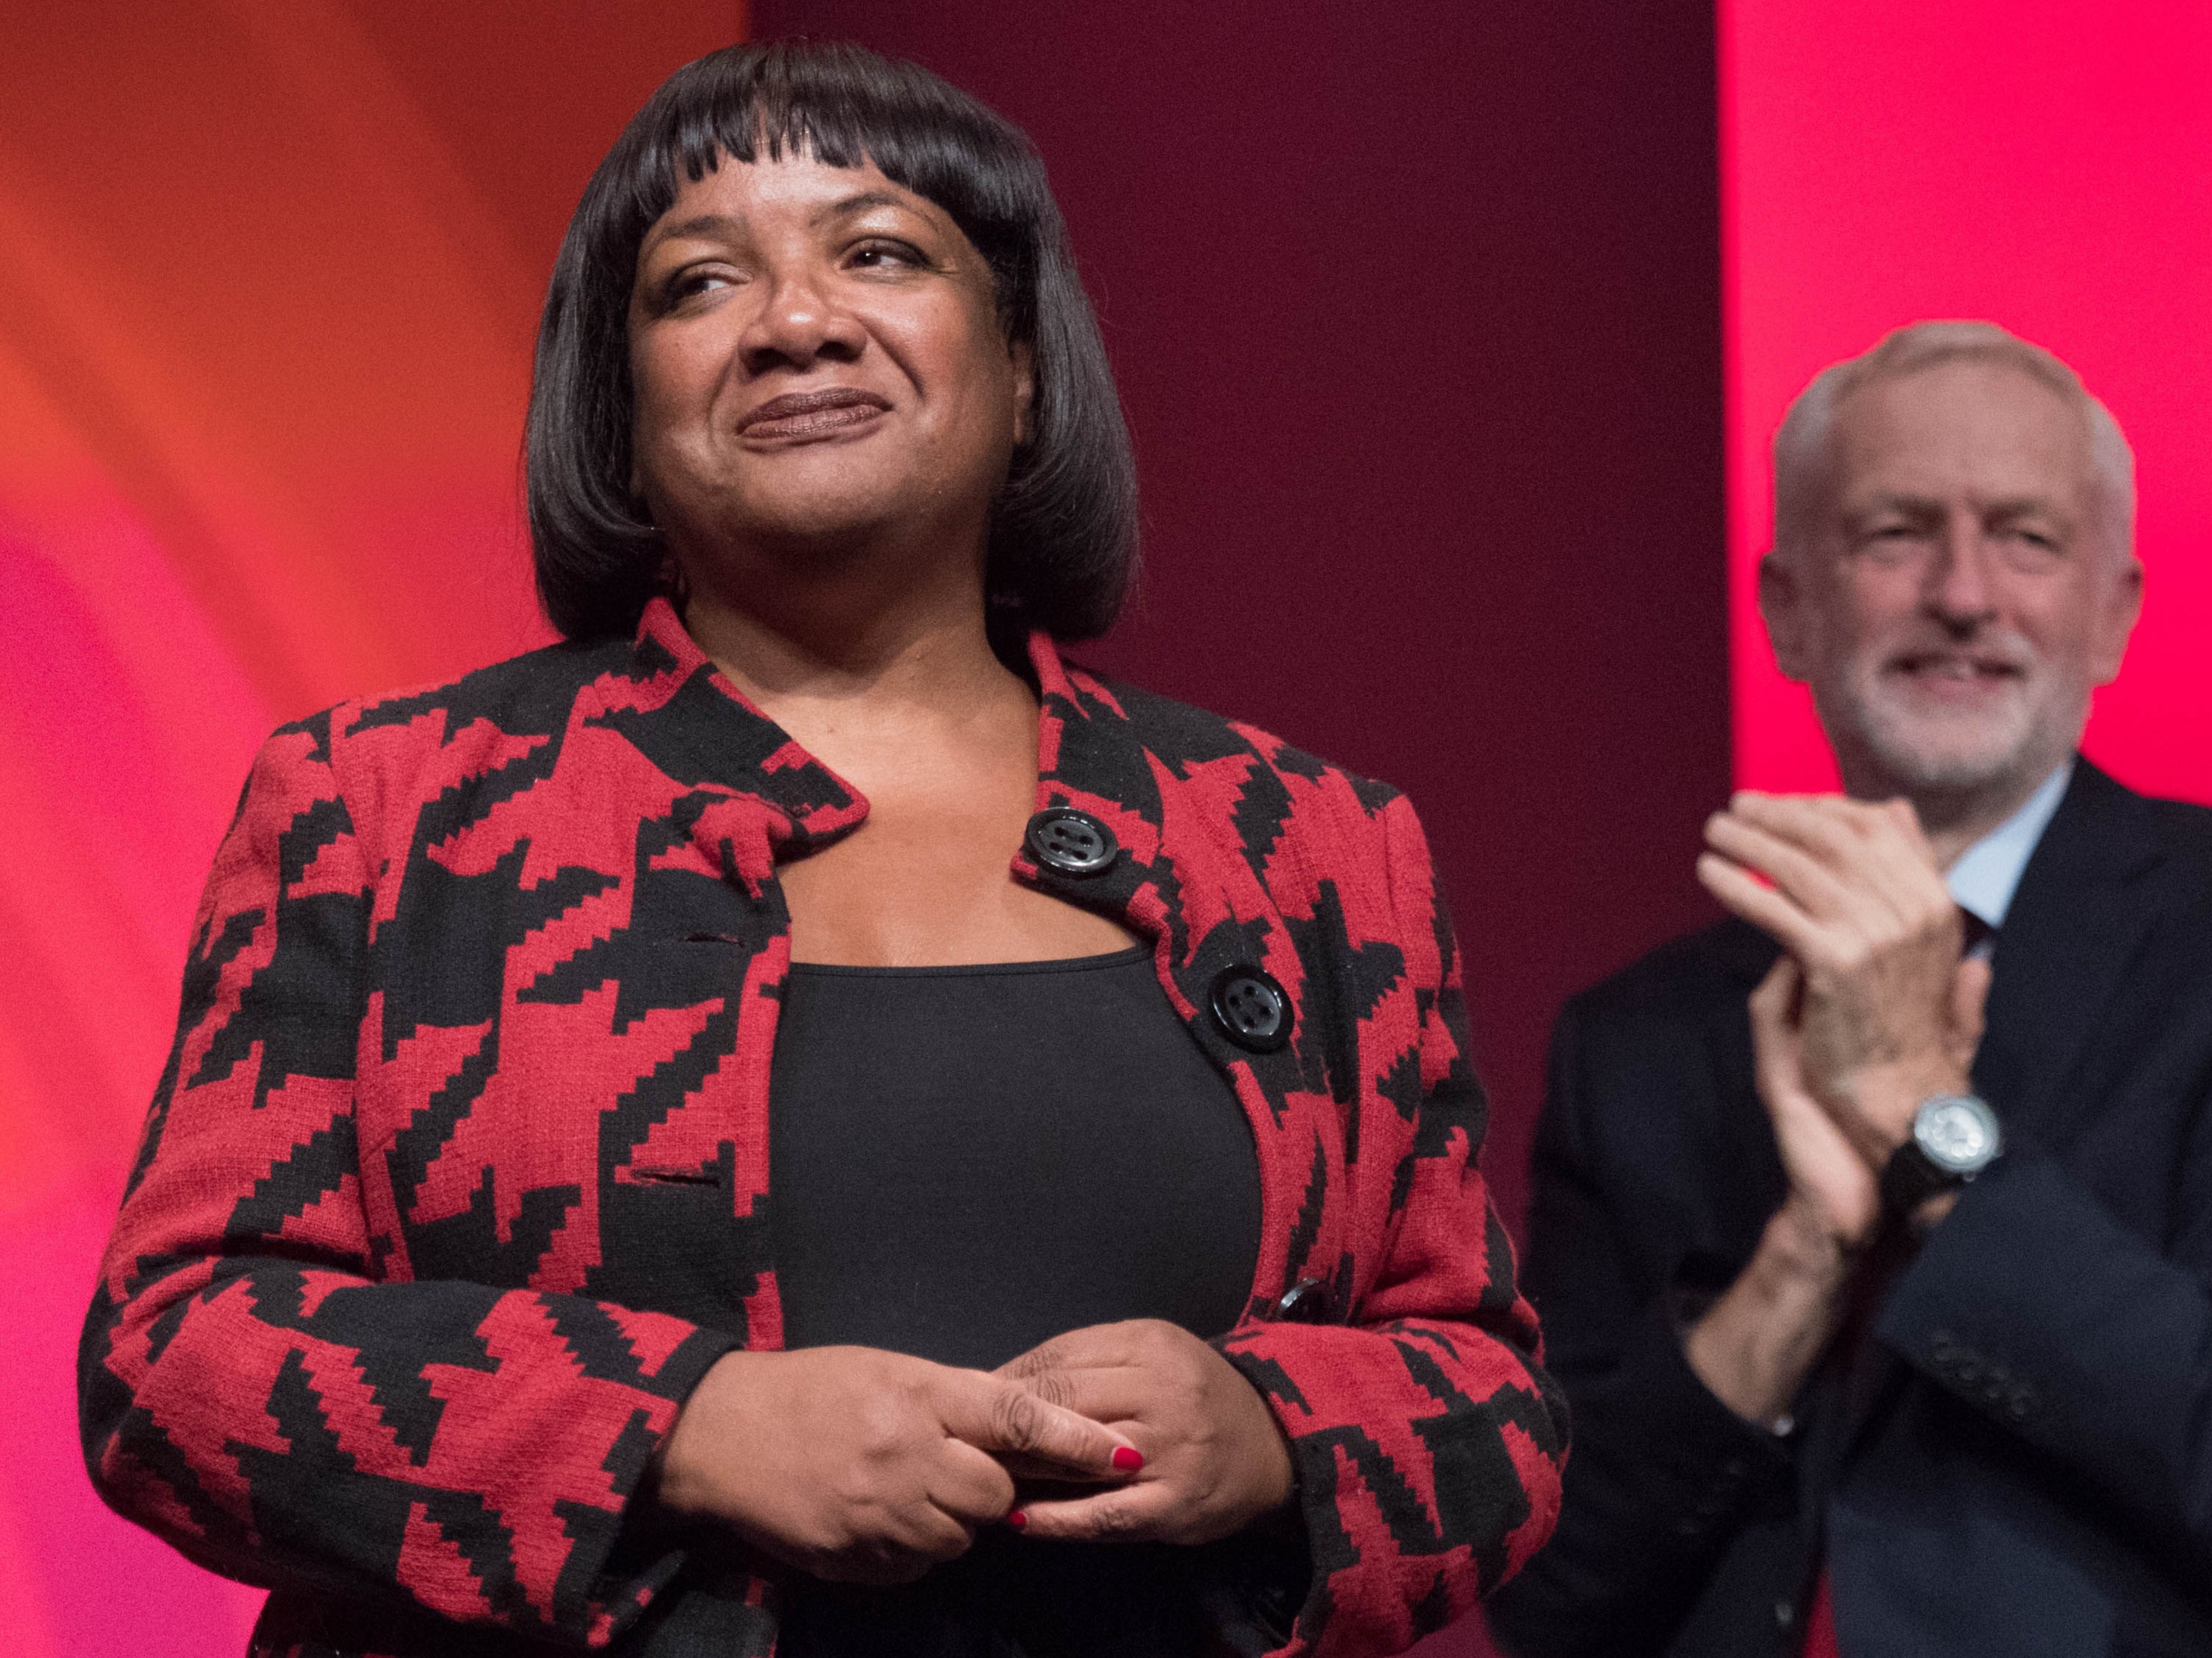 Diane Abbott at the Labour Party conference in 2018